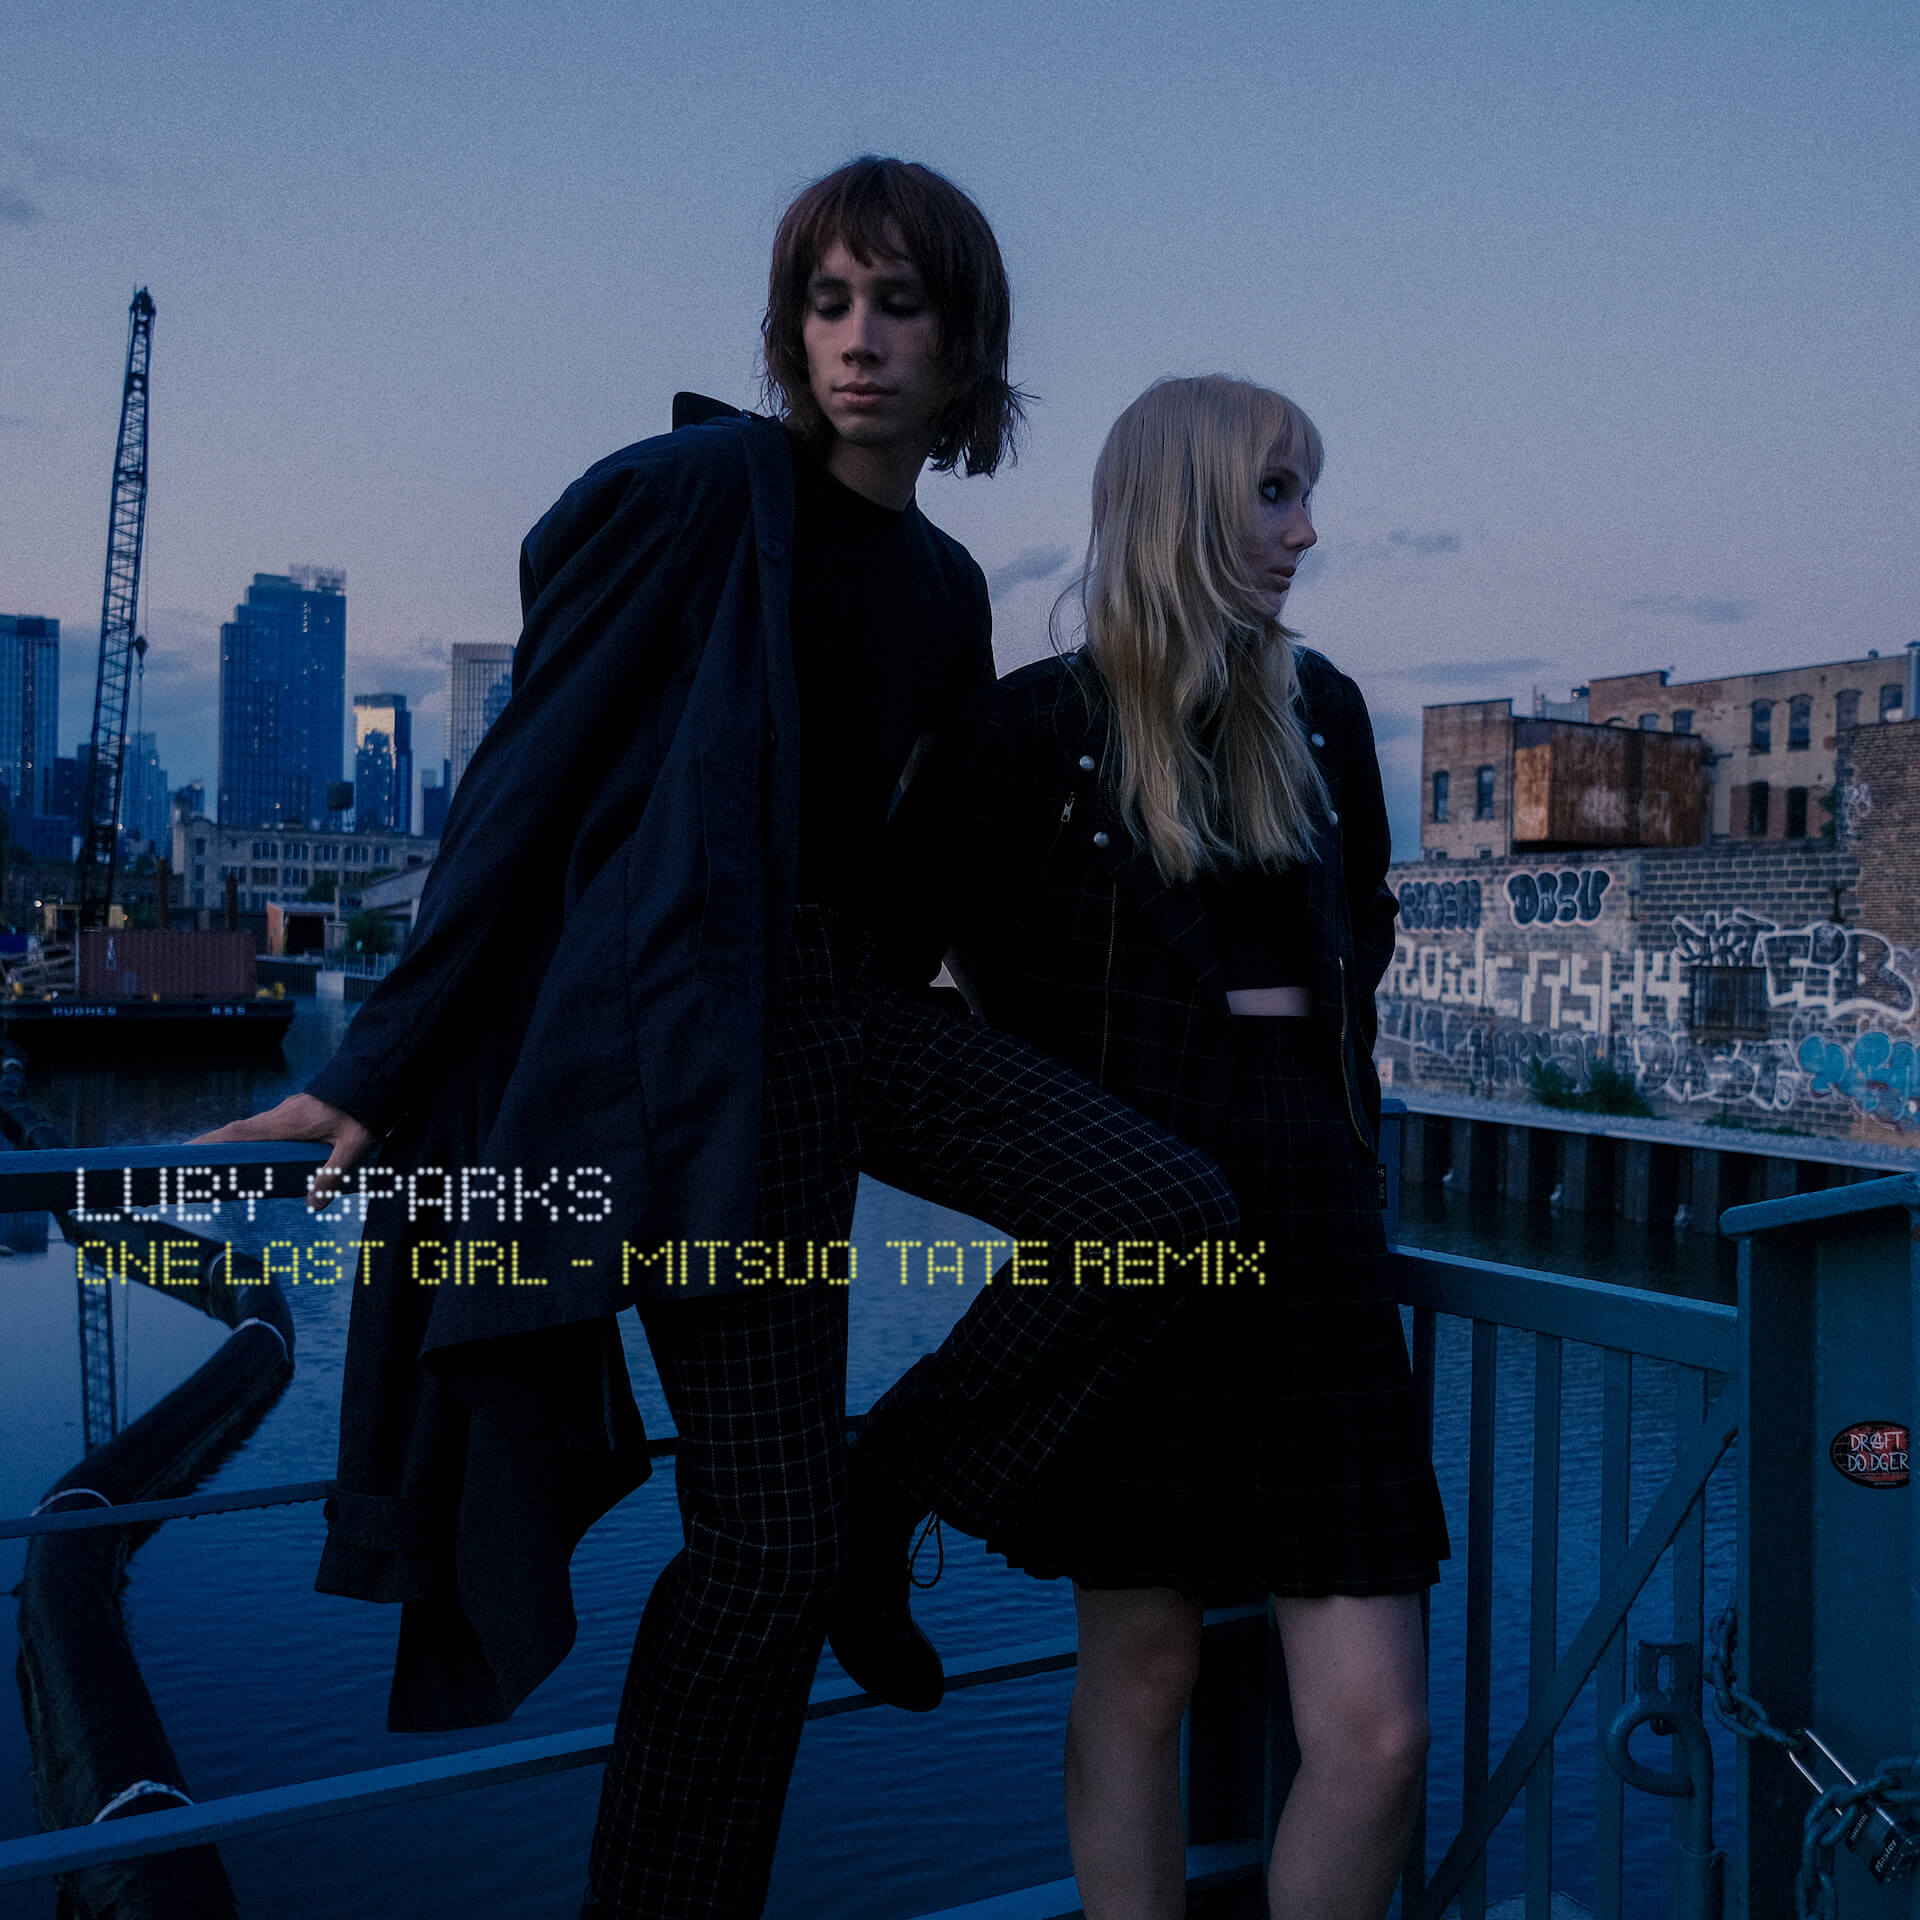 Luby Sparksの自主企画＜One Last Night＞にTHE NOVEMBERSの出演が決定｜“One Last Girl ”のMitsuo Tate Remixがリリース music230519-luby-sparks1